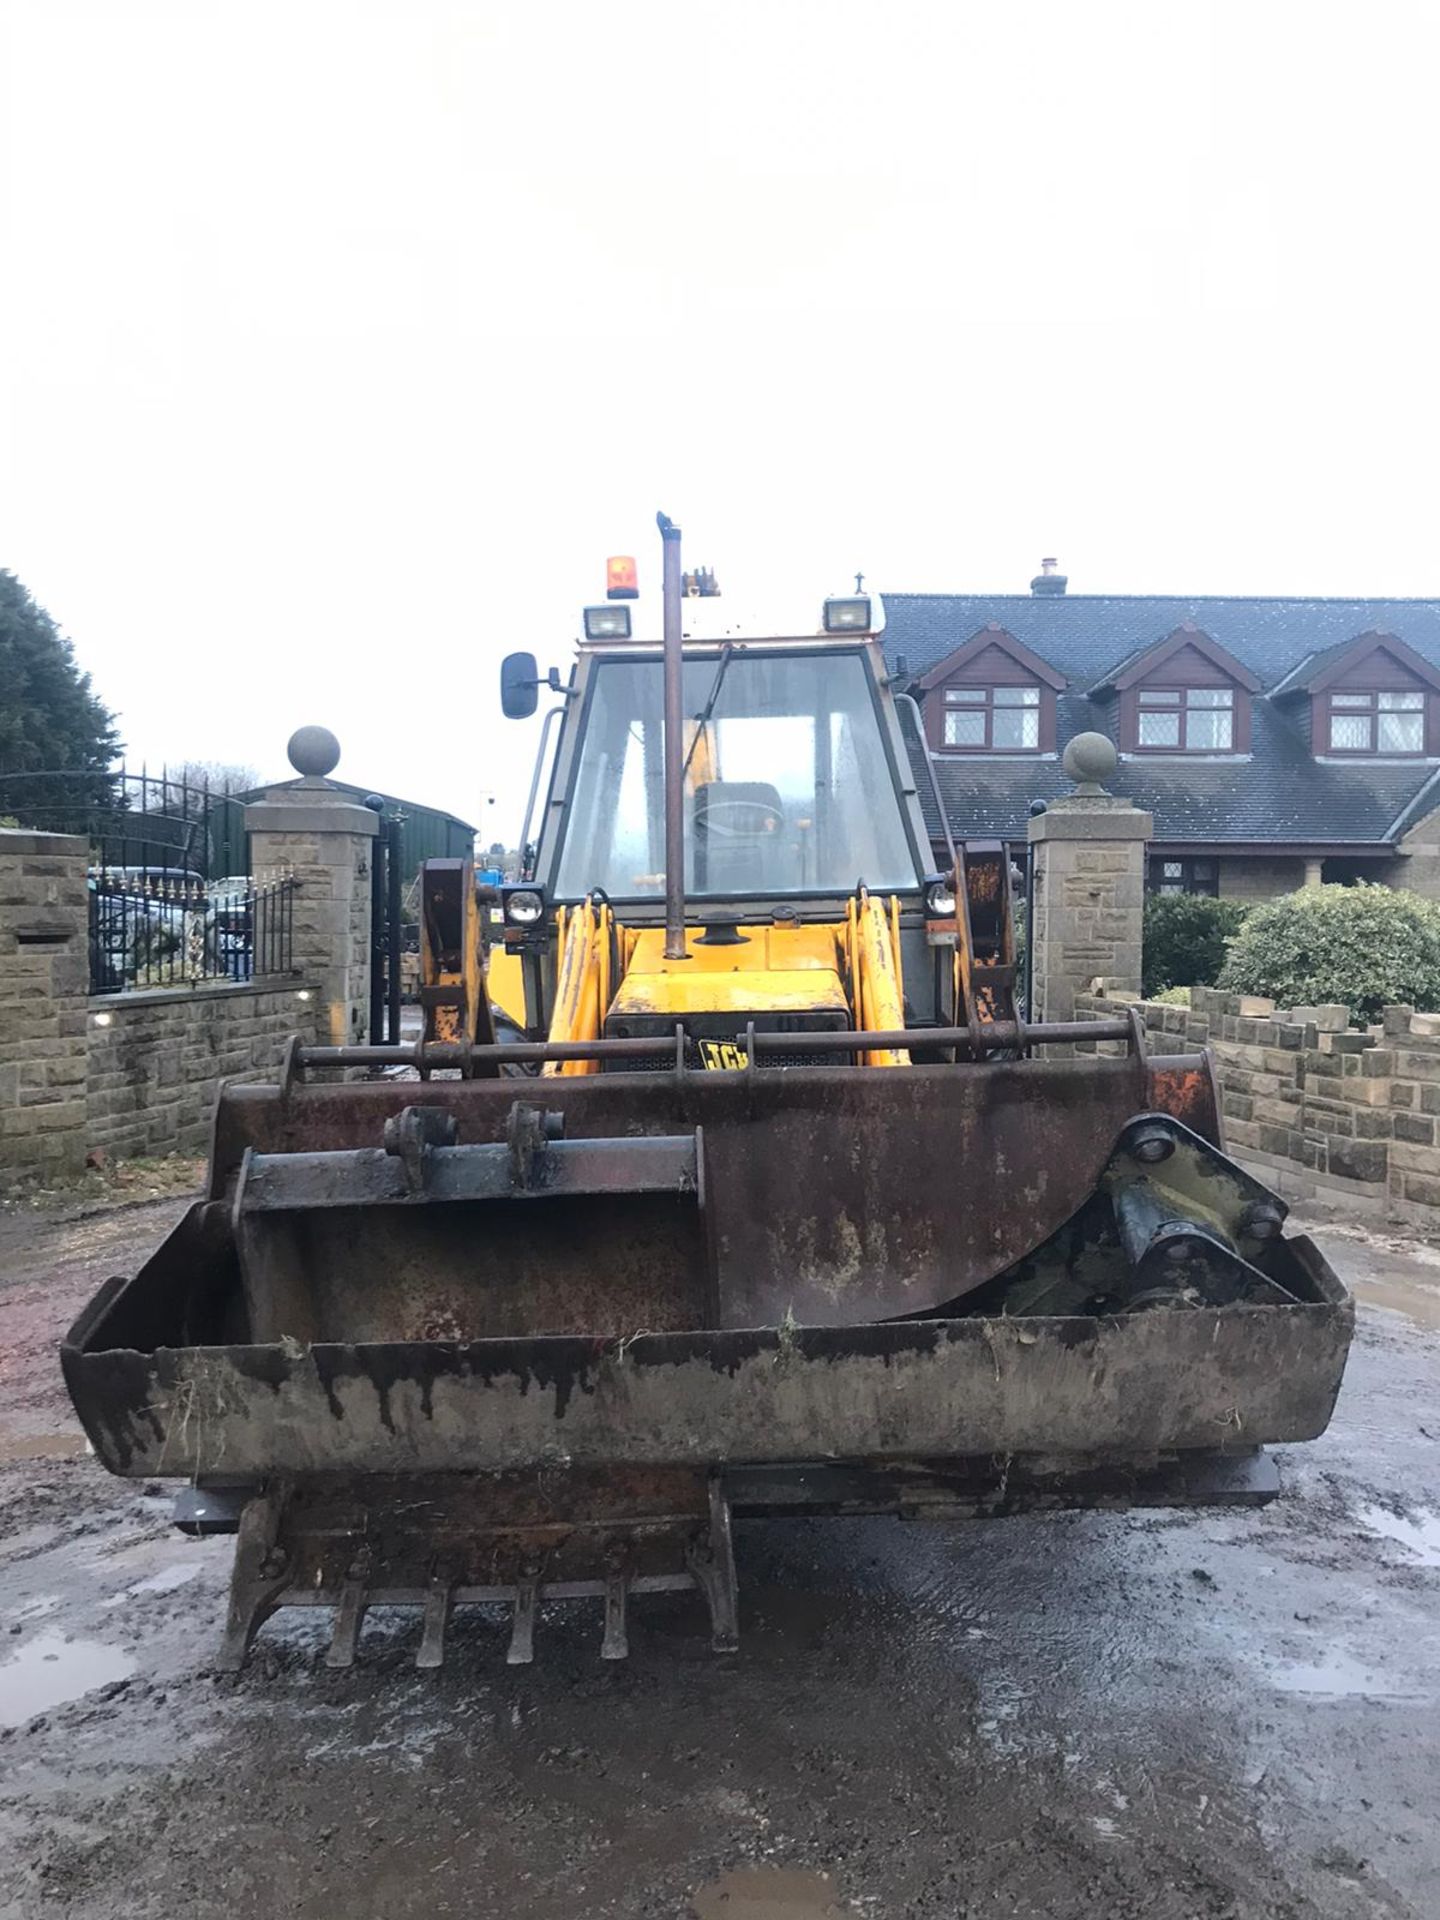 JCB 3CX SITEMASTER, 4 WHEEL DRIVE, EXTRA DIG, 4-IN-1 BUCKET, C/W 3 X BUCKETS, RUNS, WORKS & DIGS - Image 6 of 10